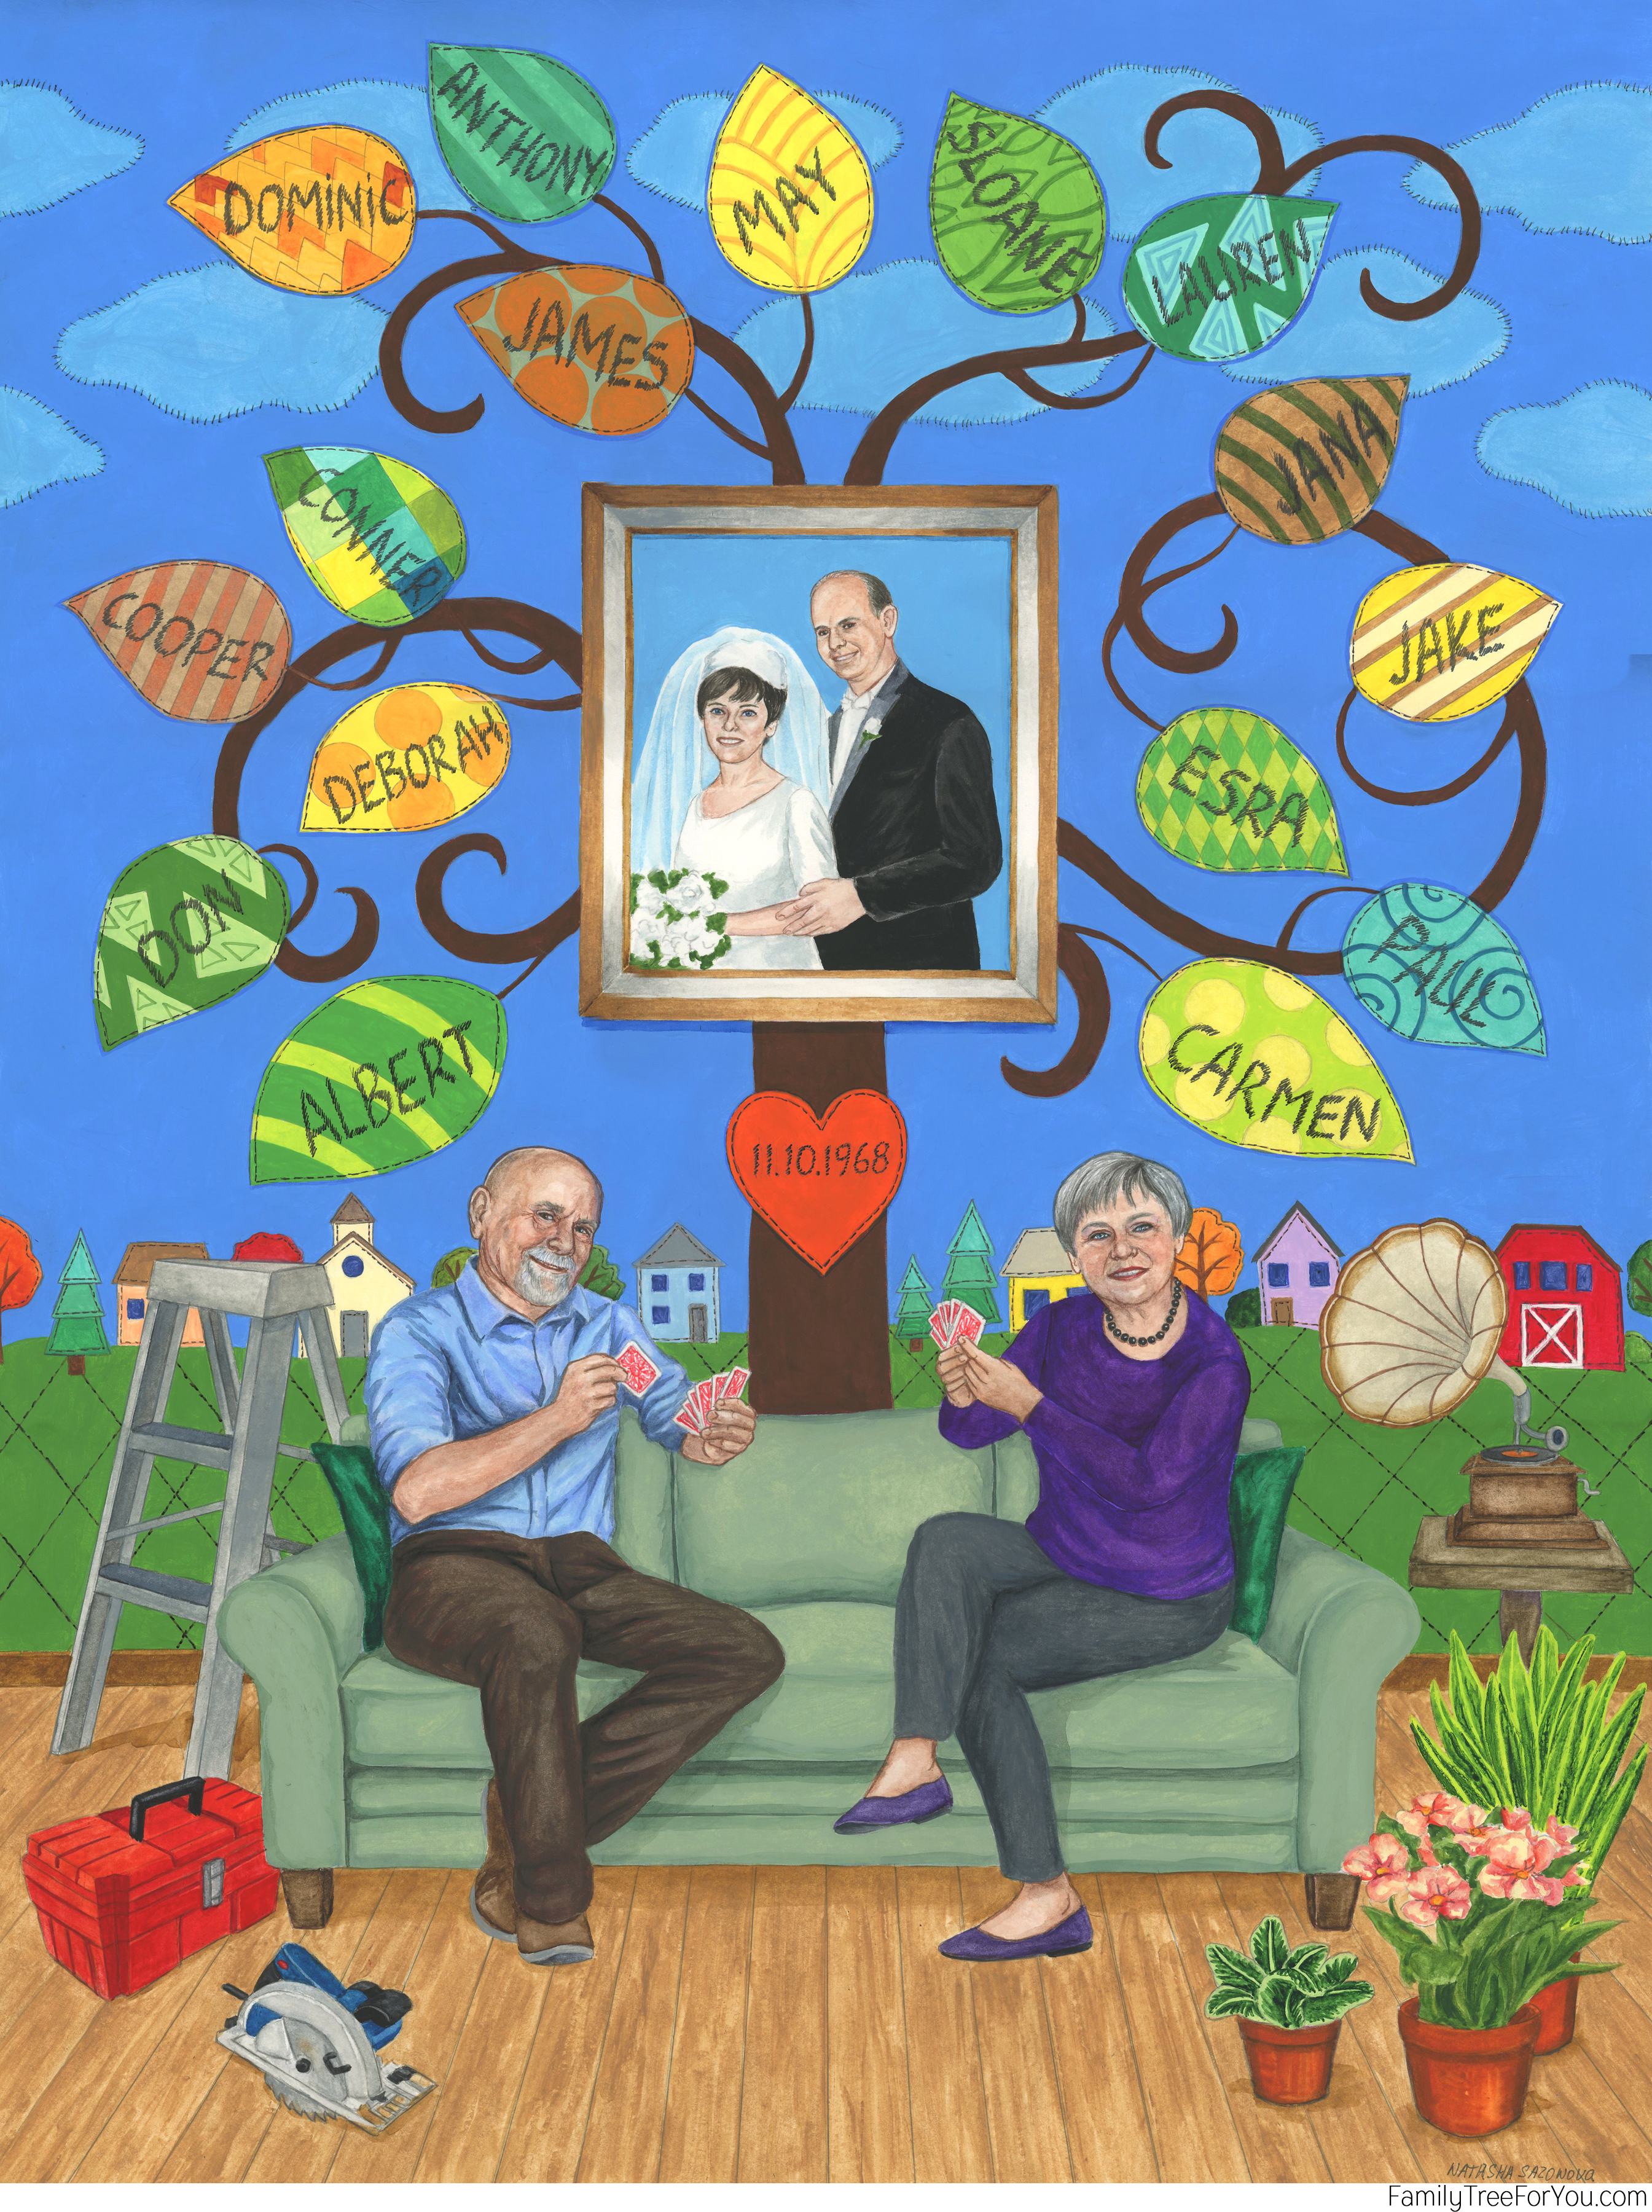 Hand-painted family tree art with couple portrait